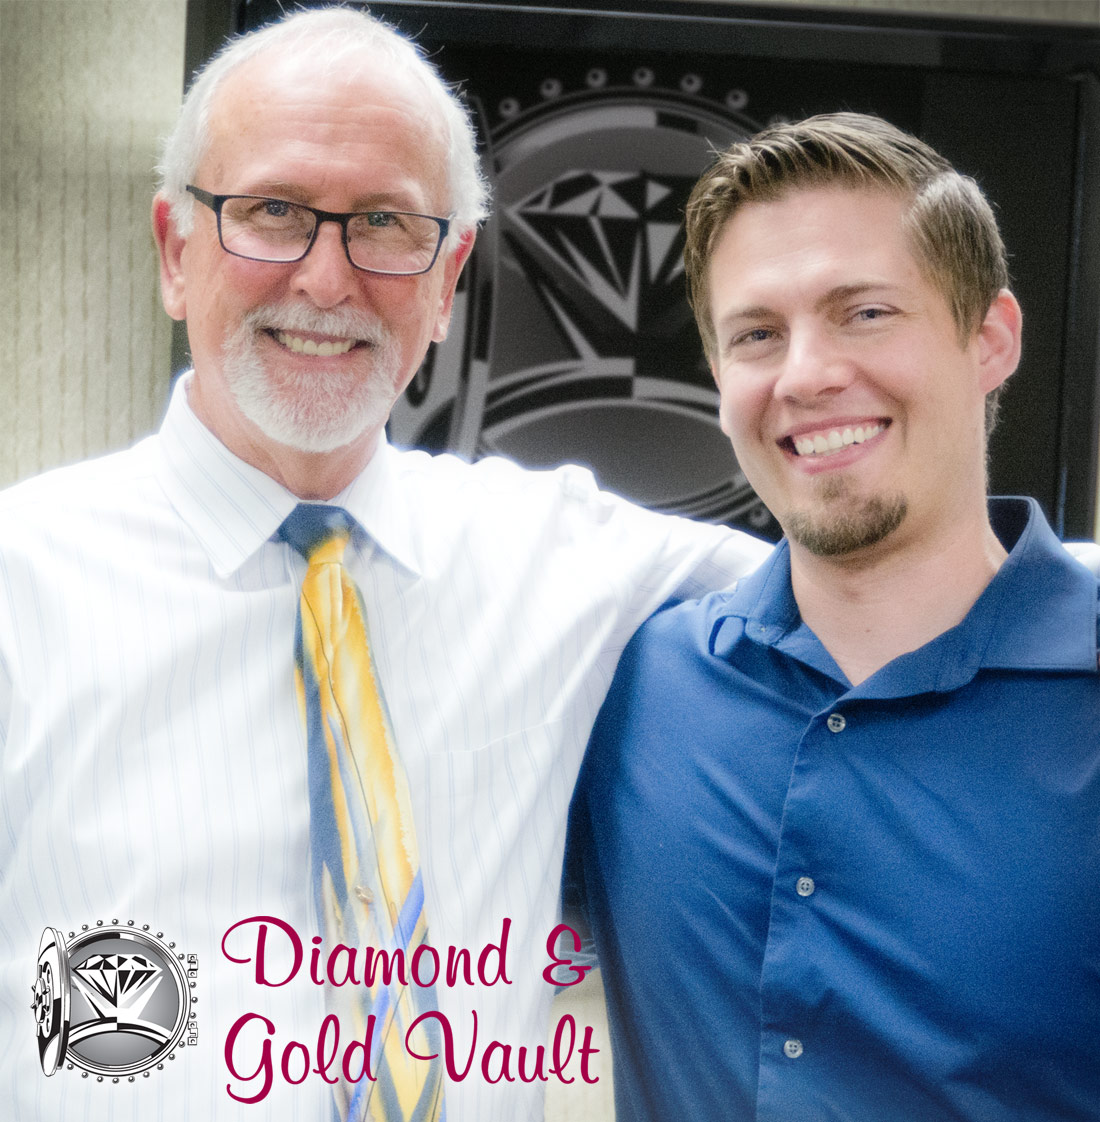 Gene from Diamond and Gold Vault with Angelo from Arden Jewelers